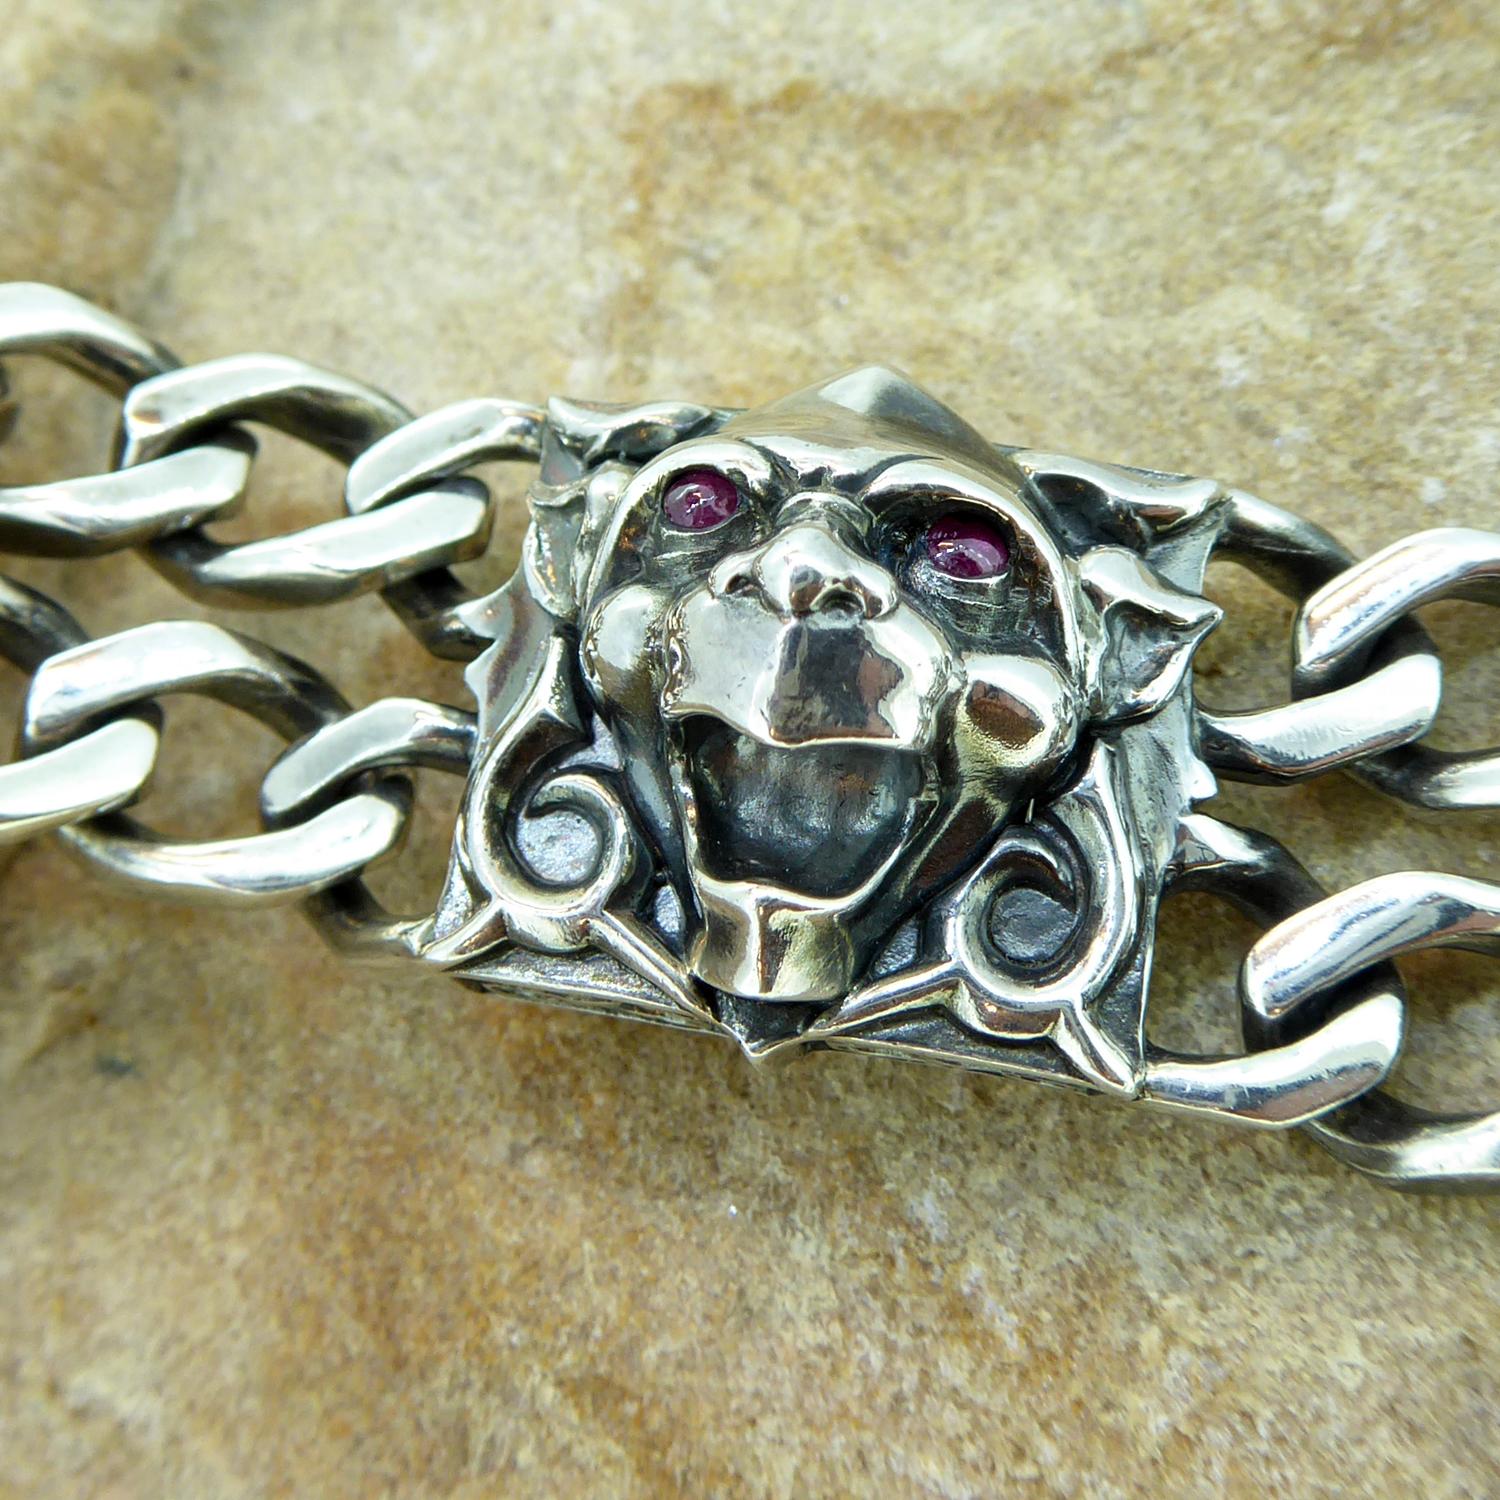 From the London Calling collection of silver jewellery for men by Stephen Webster this bracelet focuses onthe Gothic theme with its use of Gargoyle heads to create feature panel along the bracelet.  Four heads in total are evenly spread along a